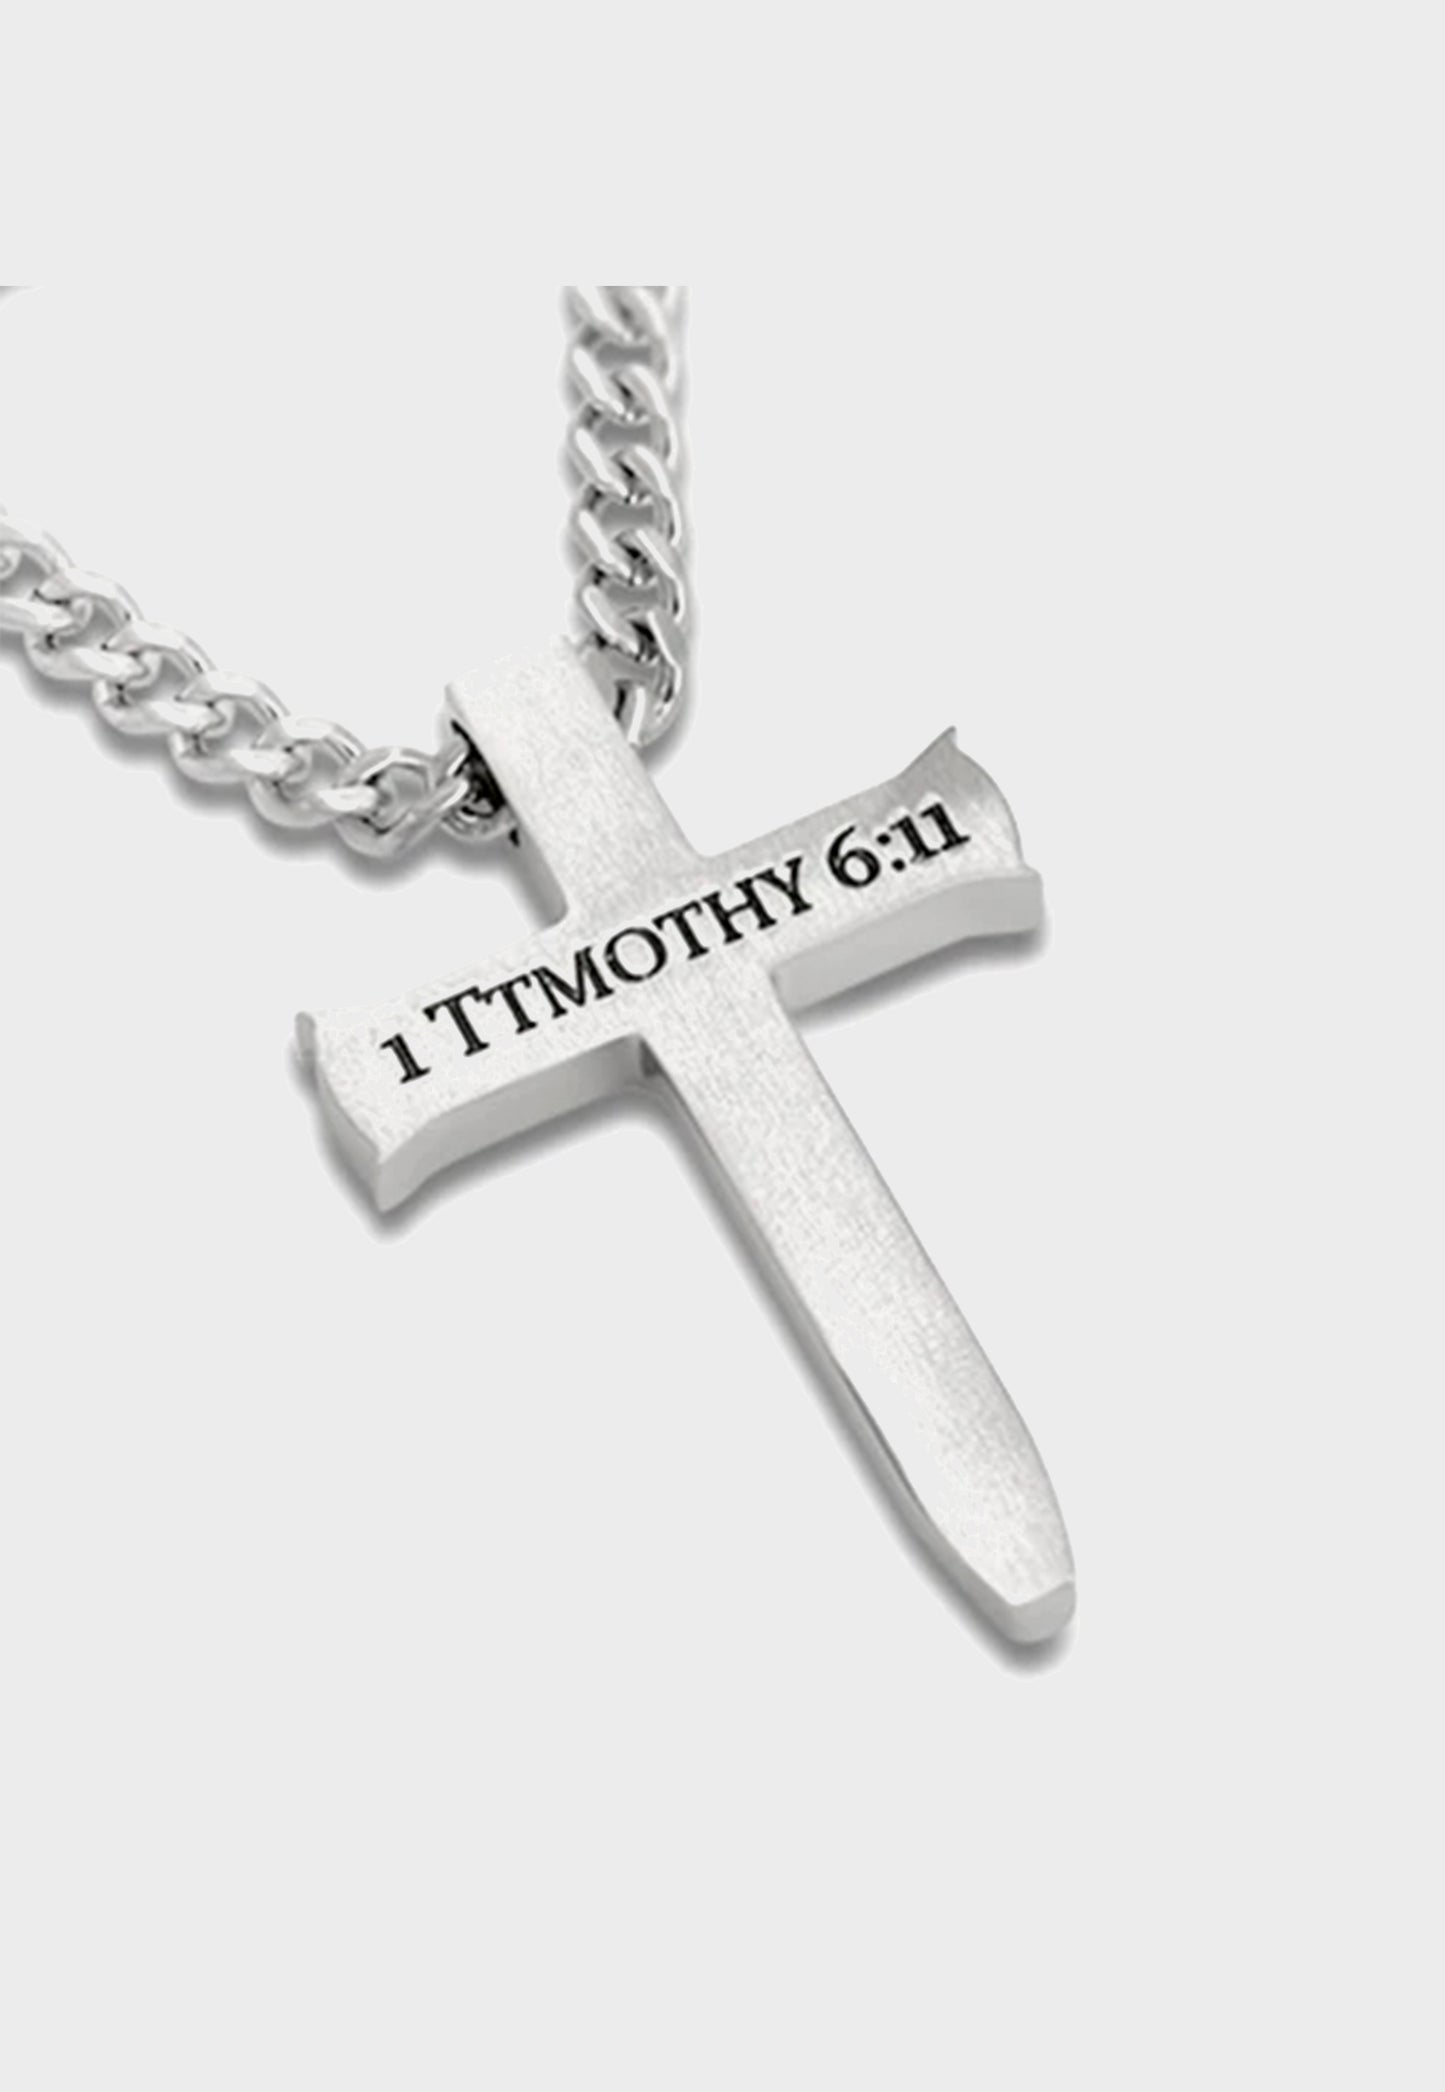 Men's Christian cross necklace with verse